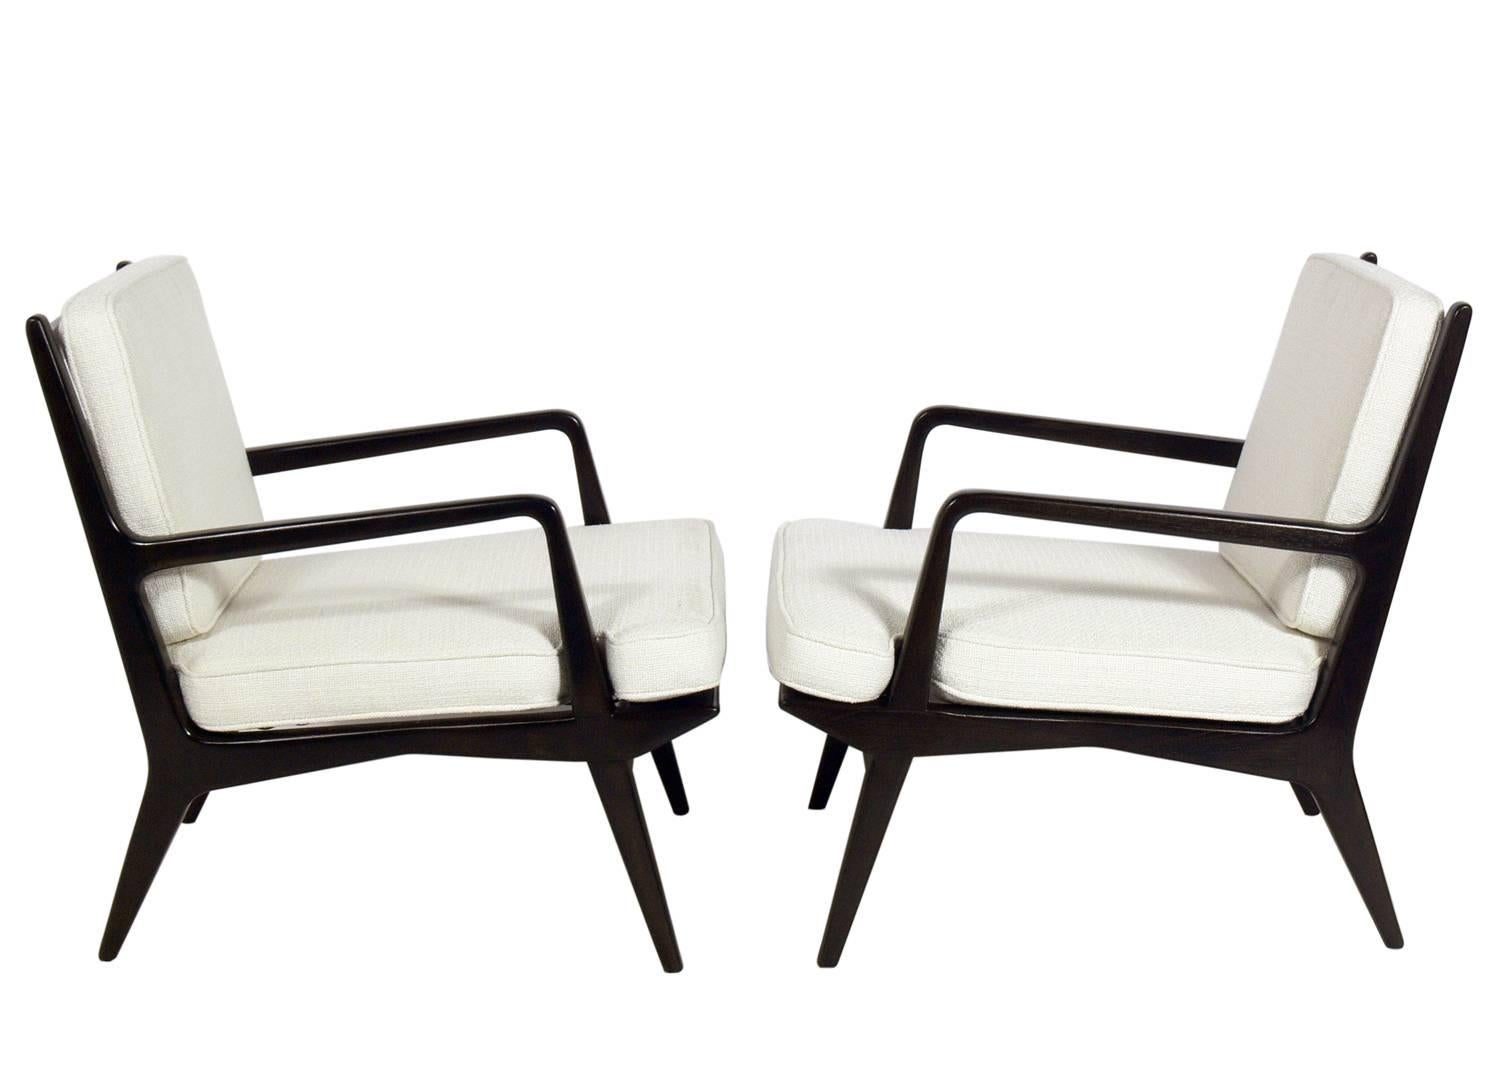 Pair of lounge chairs, designed by Carlo di Carli for Singer and Sons, American, circa 1950s. These chairs have been completely restored in an ultra deep brown lacquer and an ivory color woven upholstery.